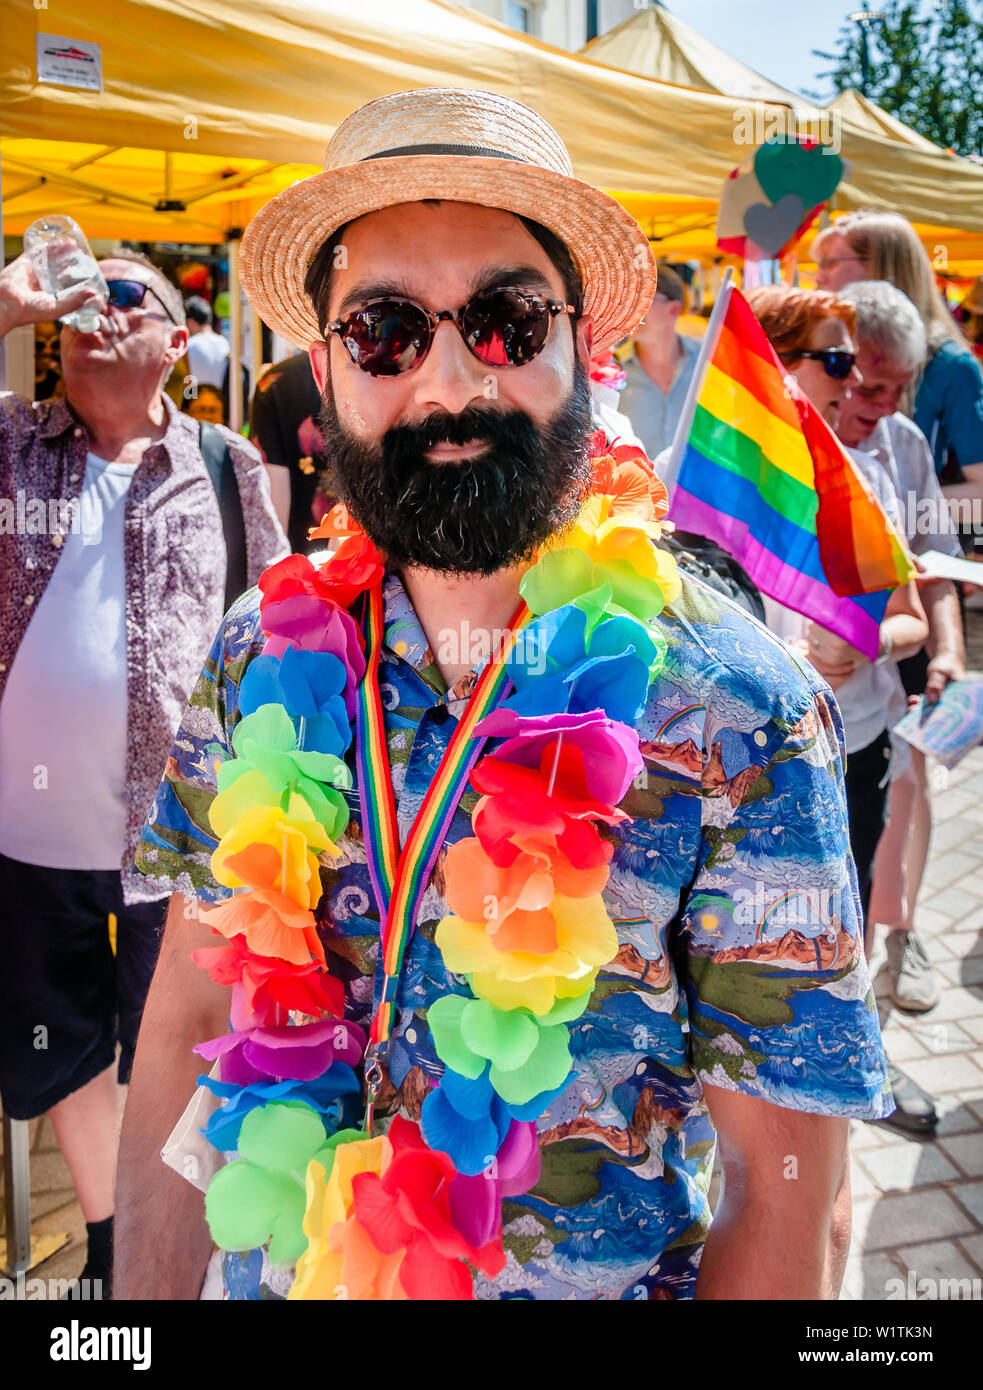 London, UK - JUNE 29, 2019:Forest Gayte Parade,  LGBTQI+ Forest Gate community who come together to celebrate Stock Photo